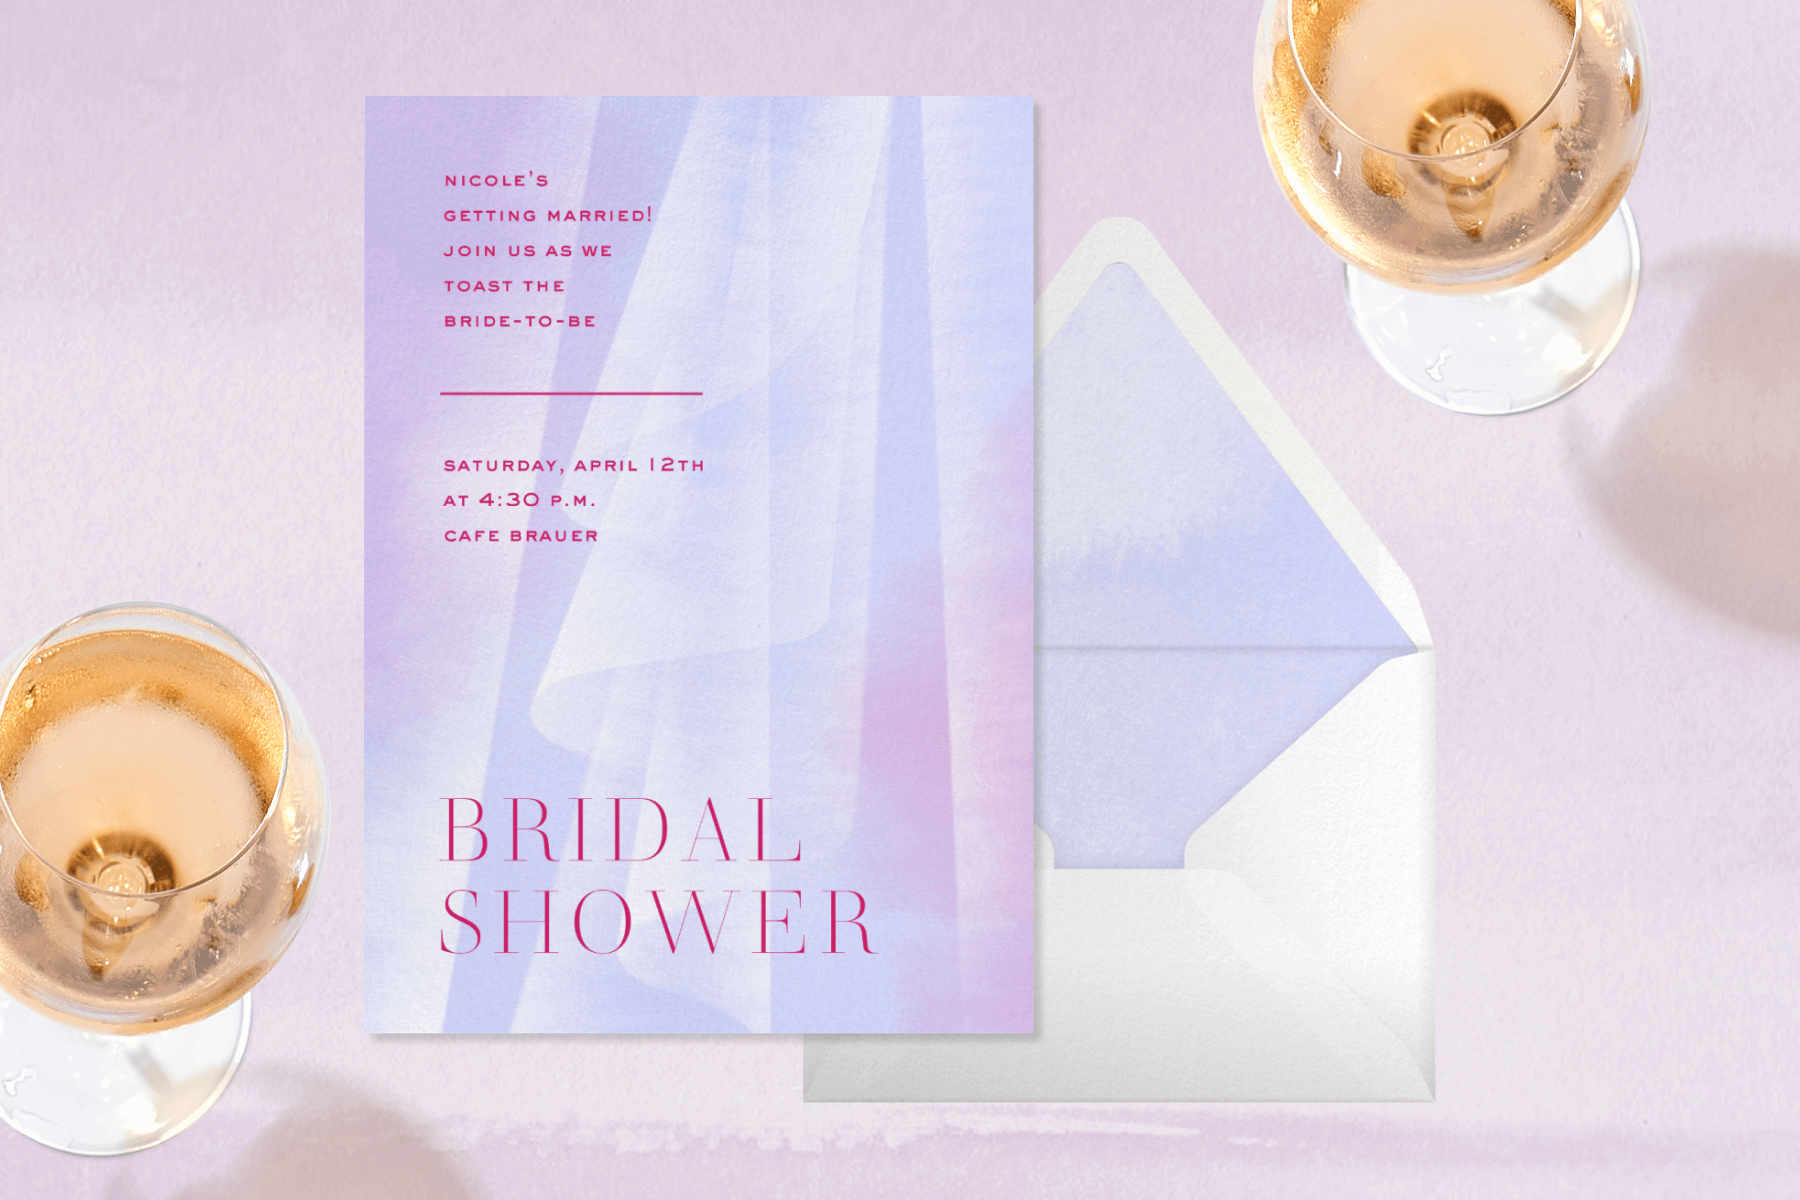 A bridal shower invitation with a light purple, abstract depiction of a bridal veil and white envelope lies beside two rock candy pops and a glass of rosé.